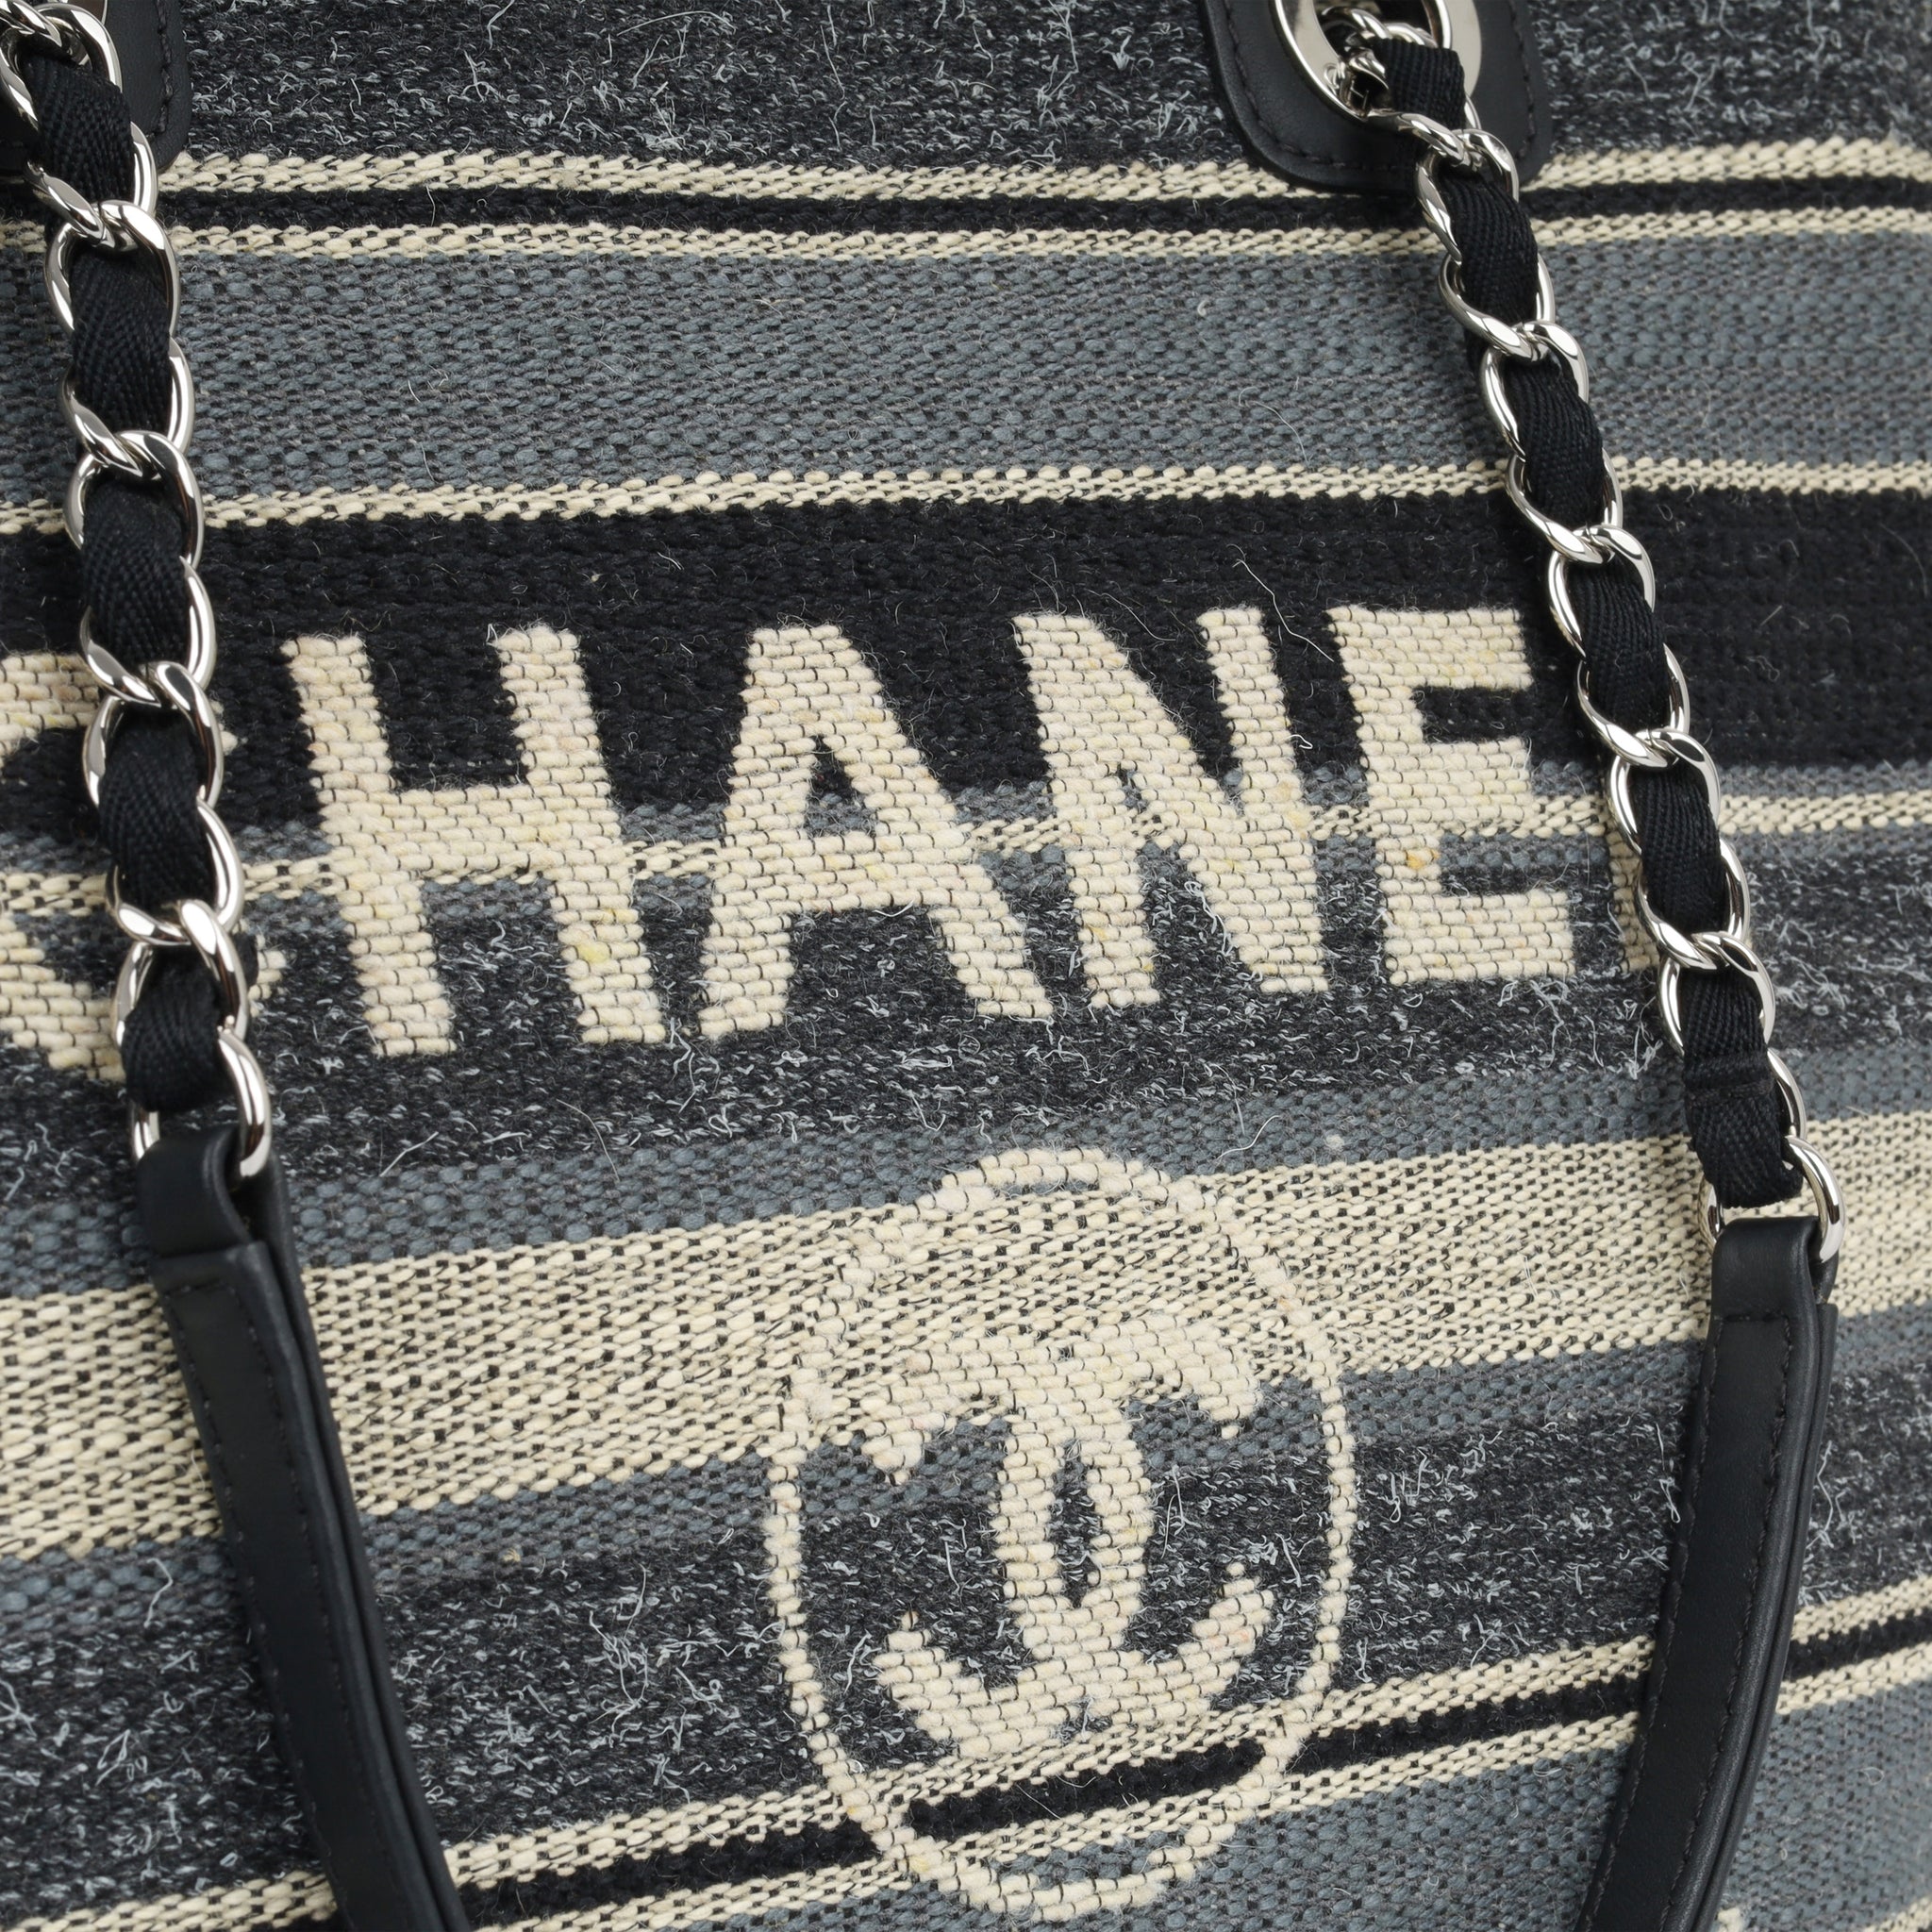 Pre-Loved Chanel Small Deauville Tote